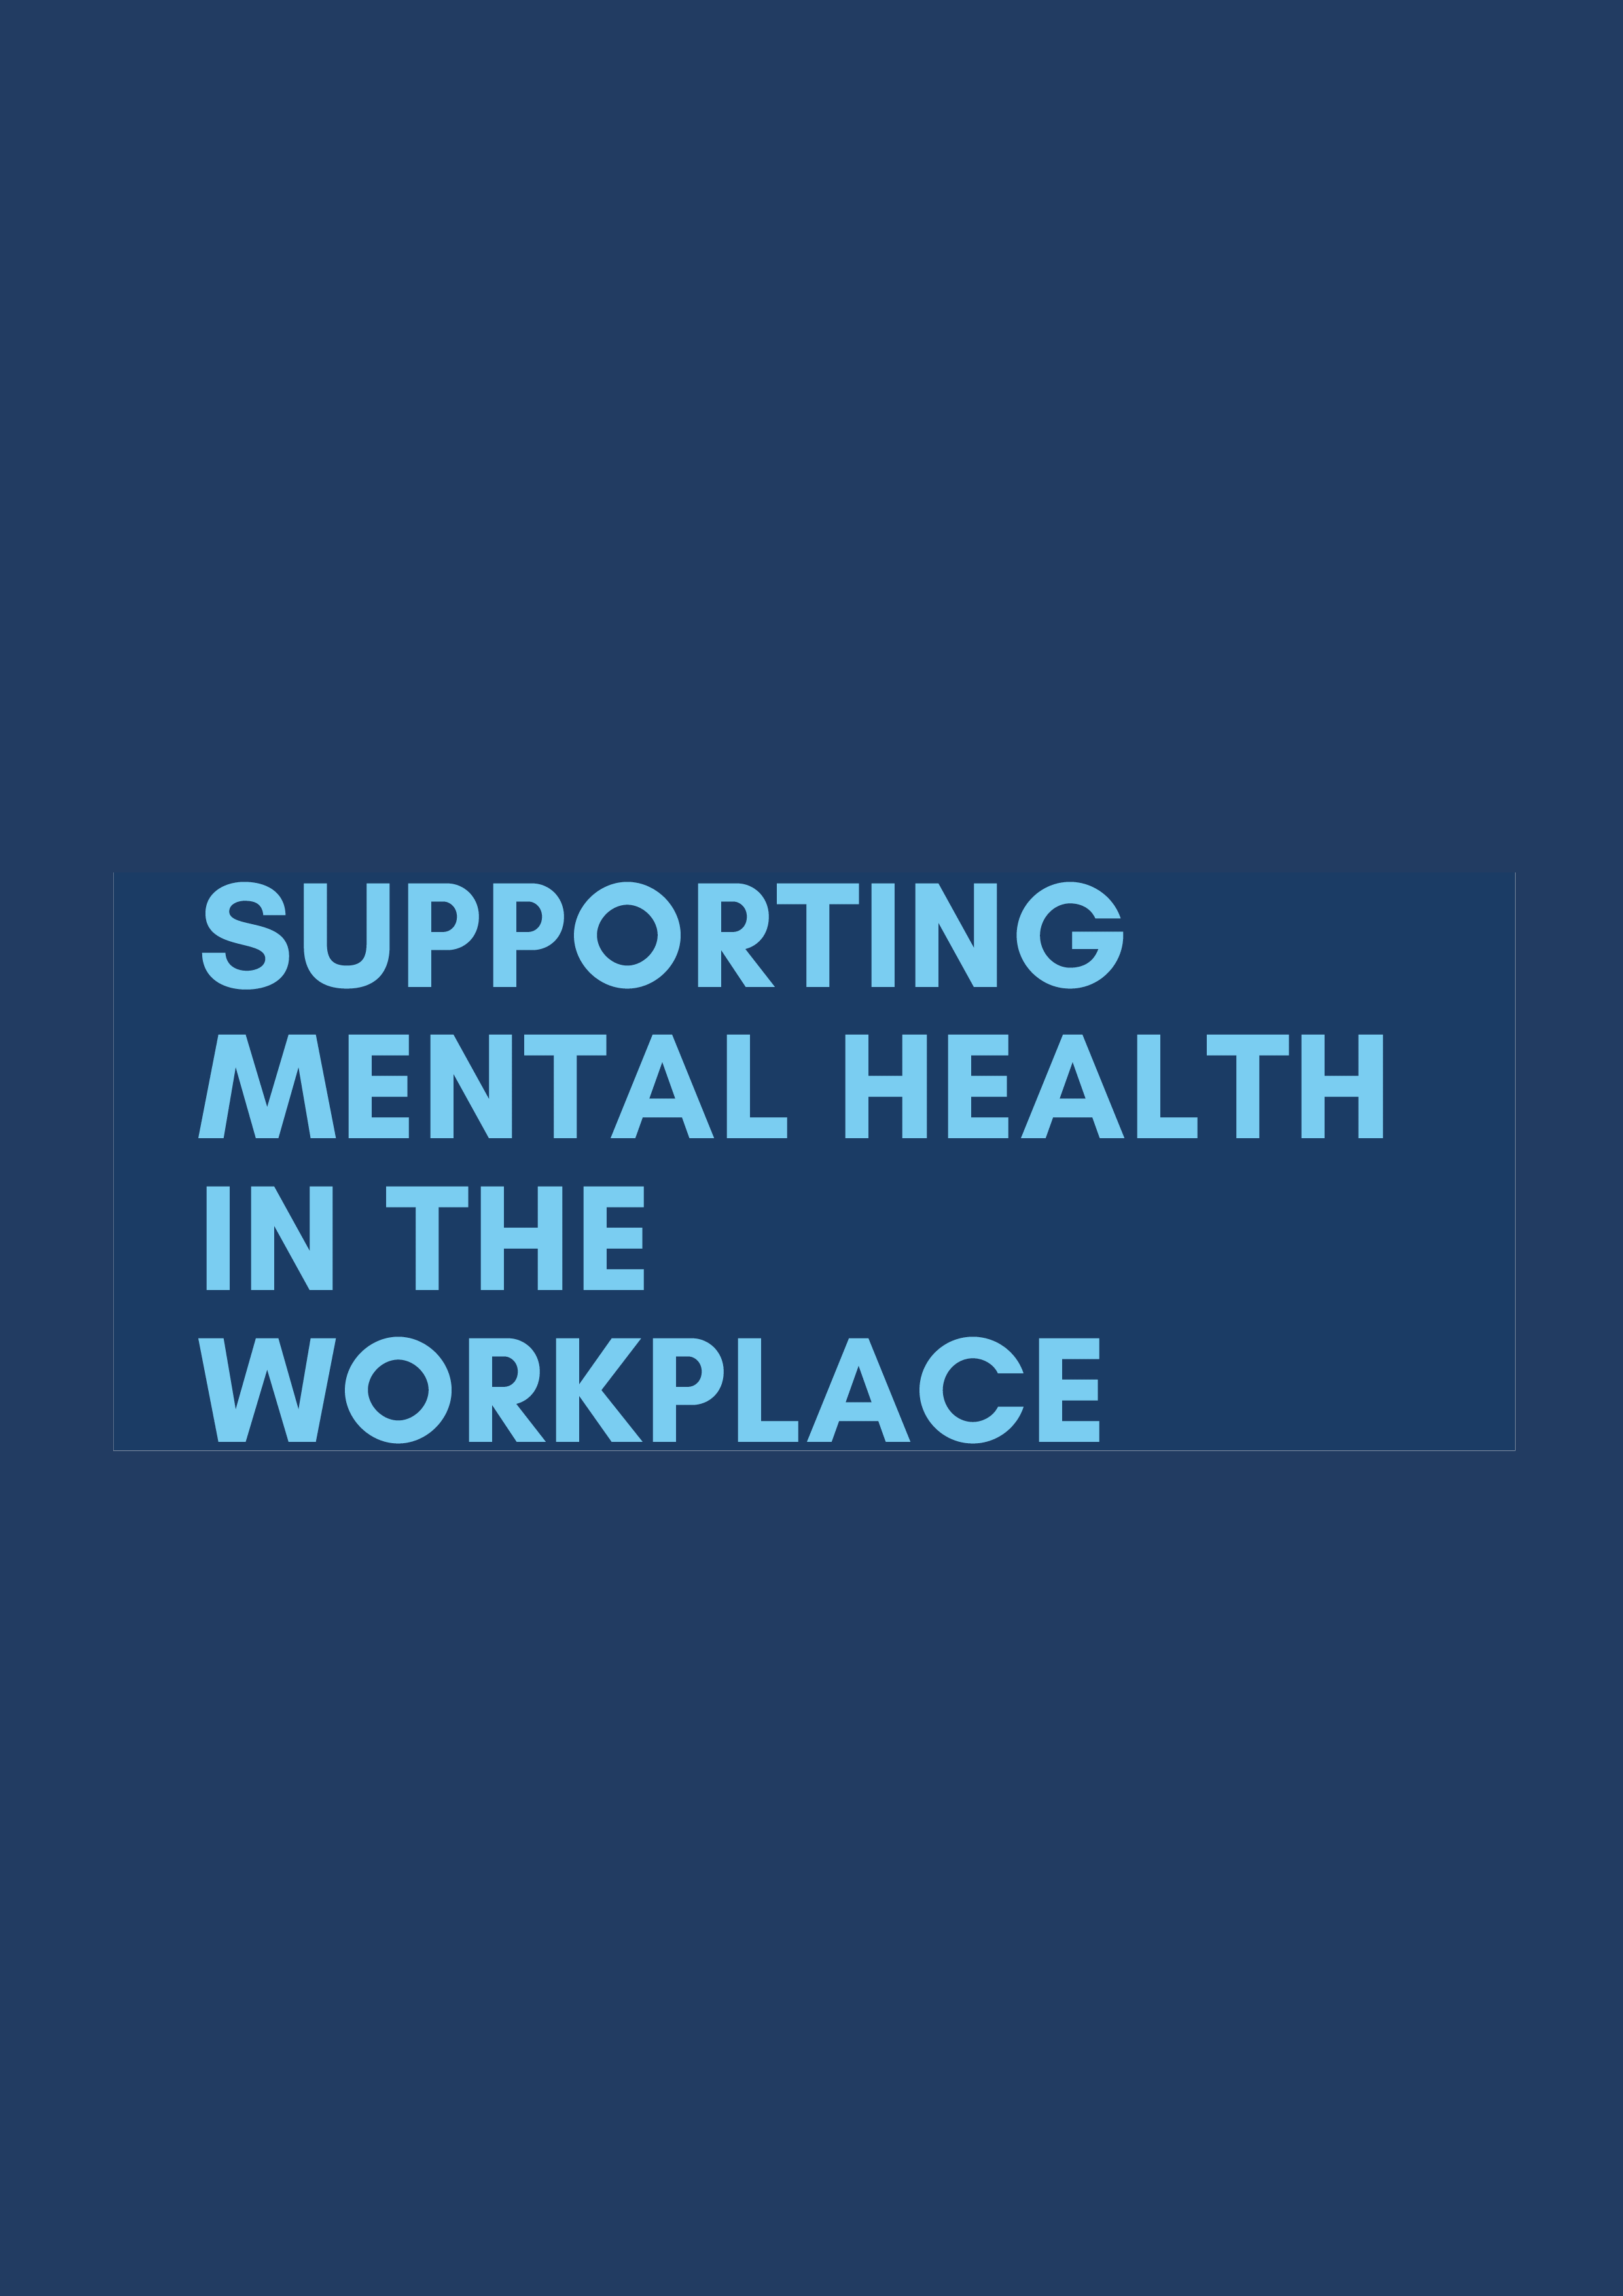 Supporting Mental Health in the Workplace